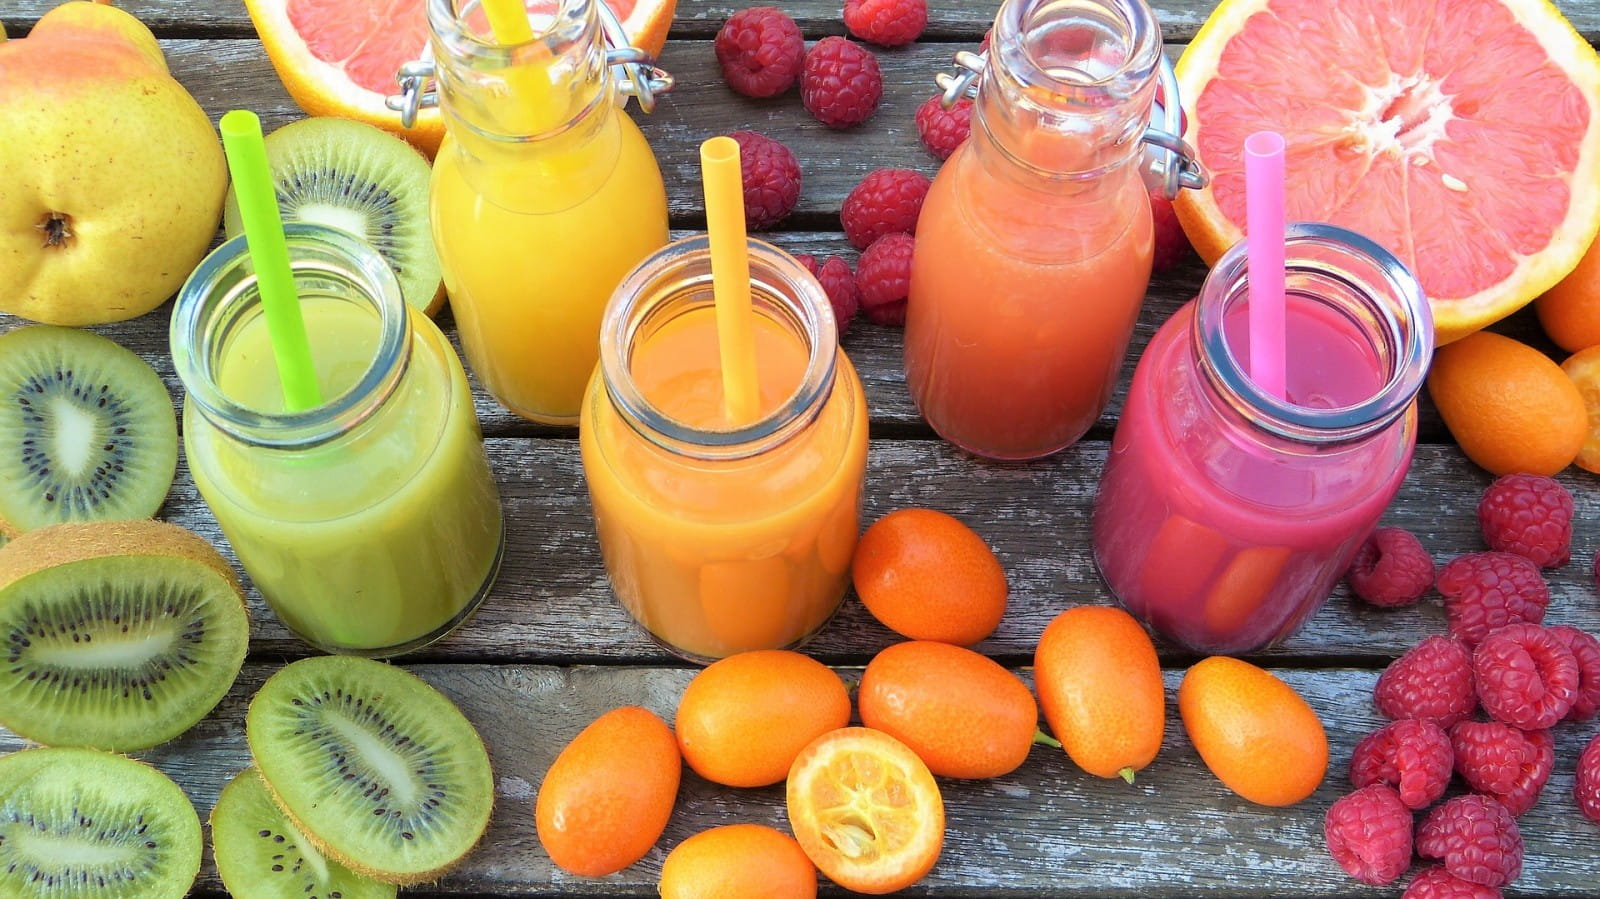 A beginner's guide to juicing